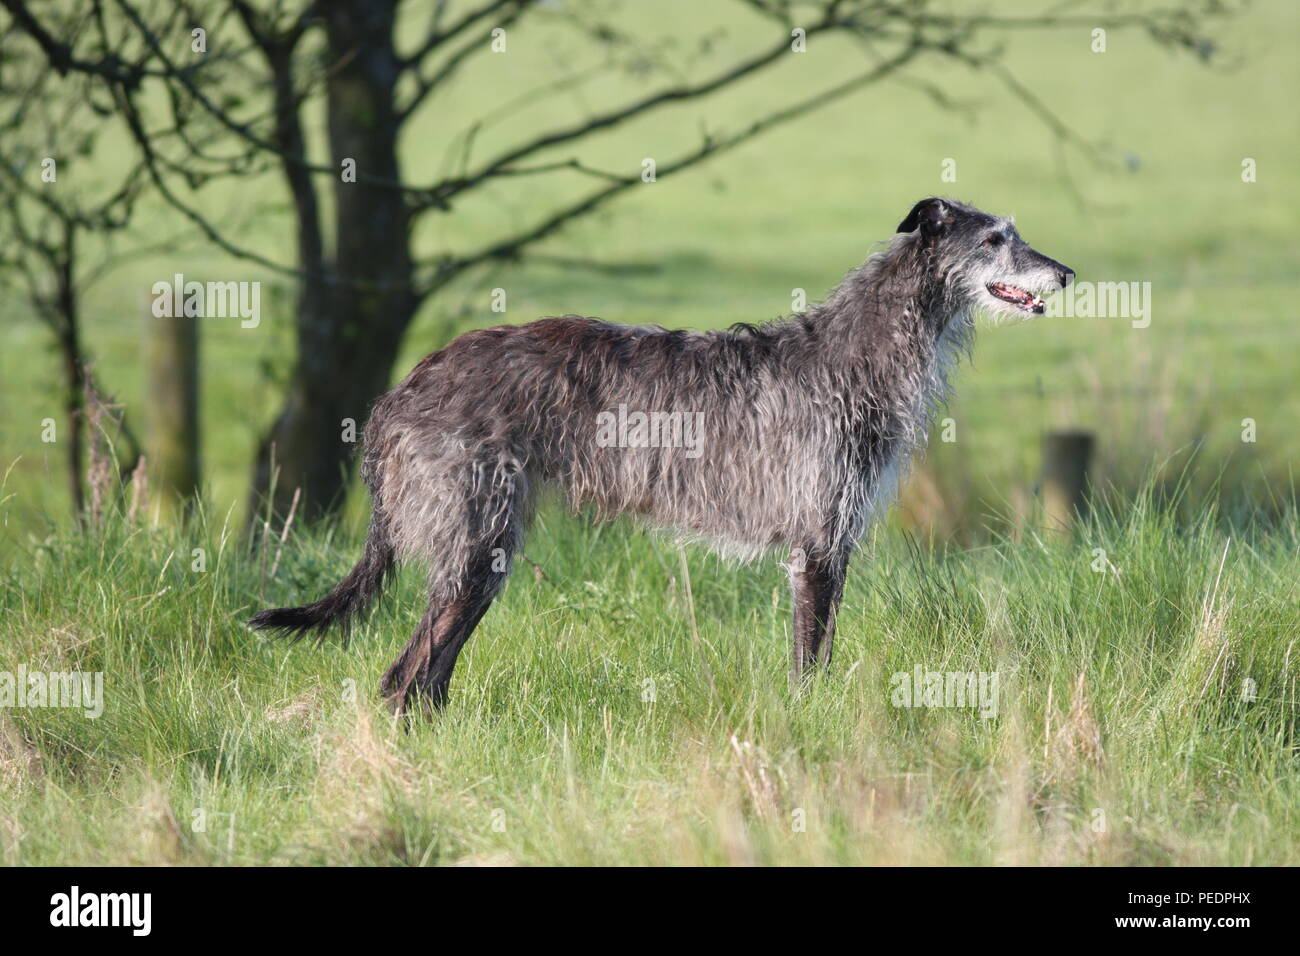 Irish wolfhound similar to Deerhound, this large sighthound was breed for hunting large quarry for food, this dog is standing side on to the viewer Stock Photo